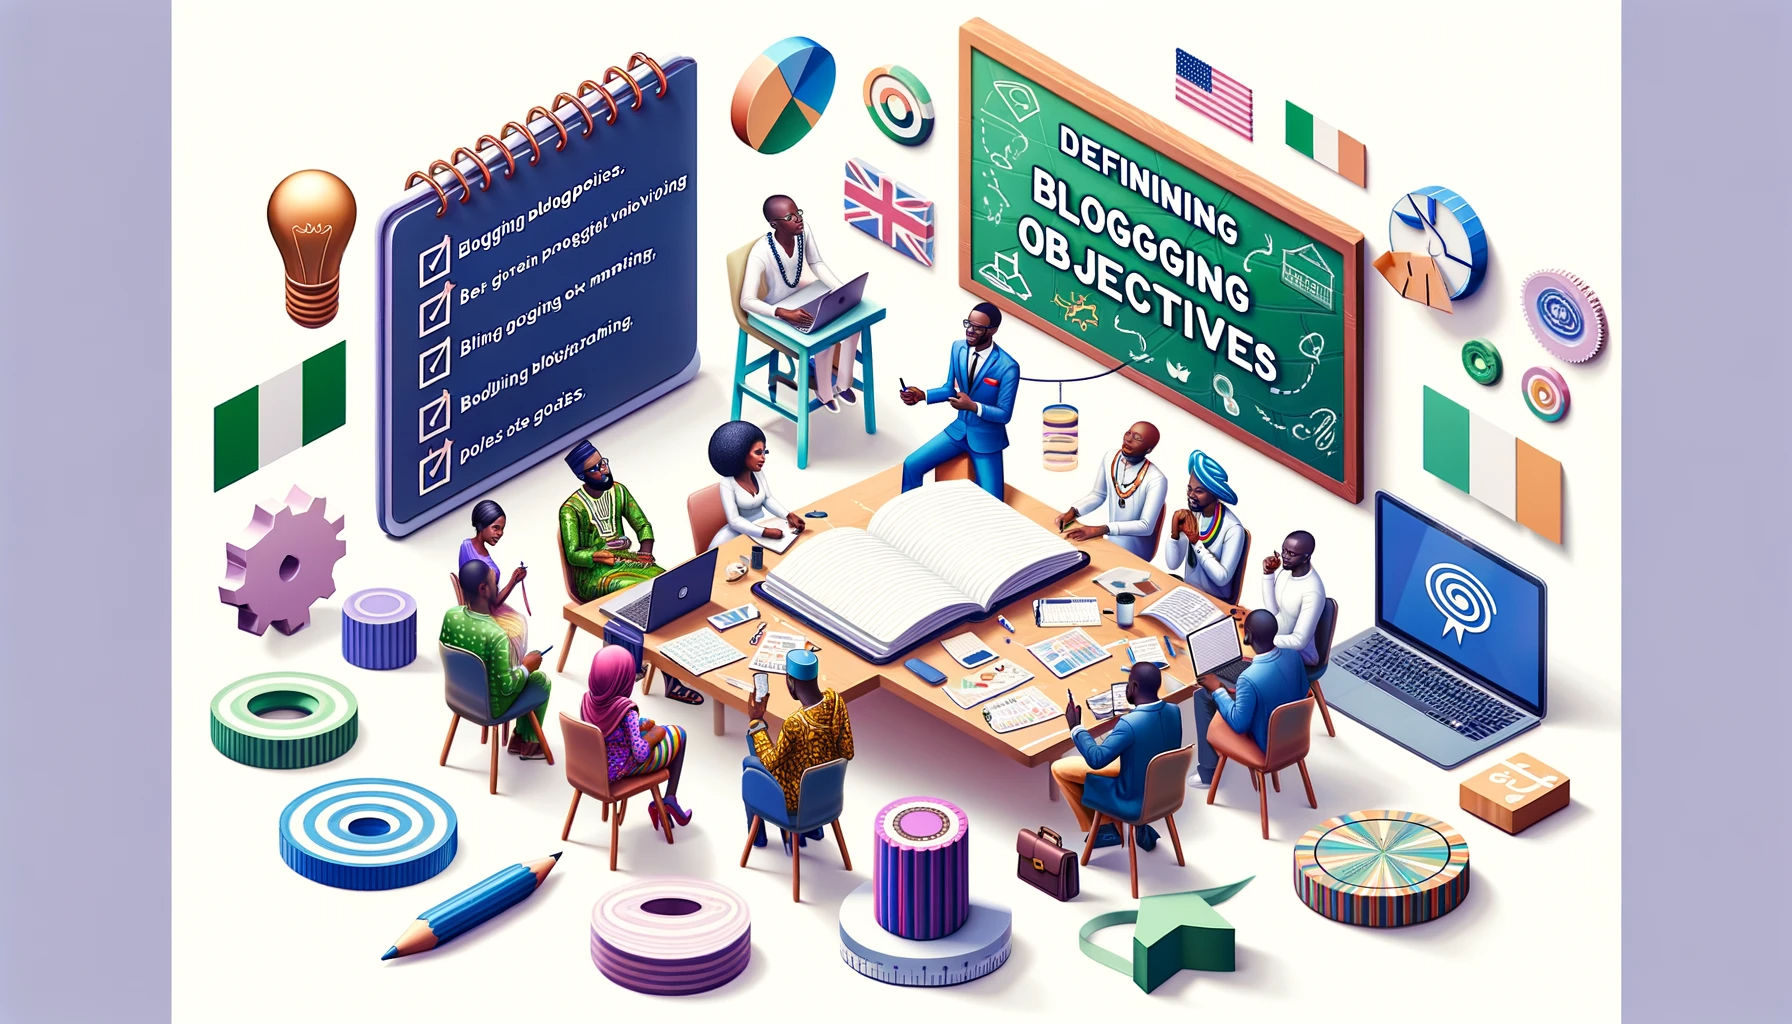 The process of defining blogging objectives in Nigeria, highlighting strategic planning and goal setting among Nigerian bloggers.
